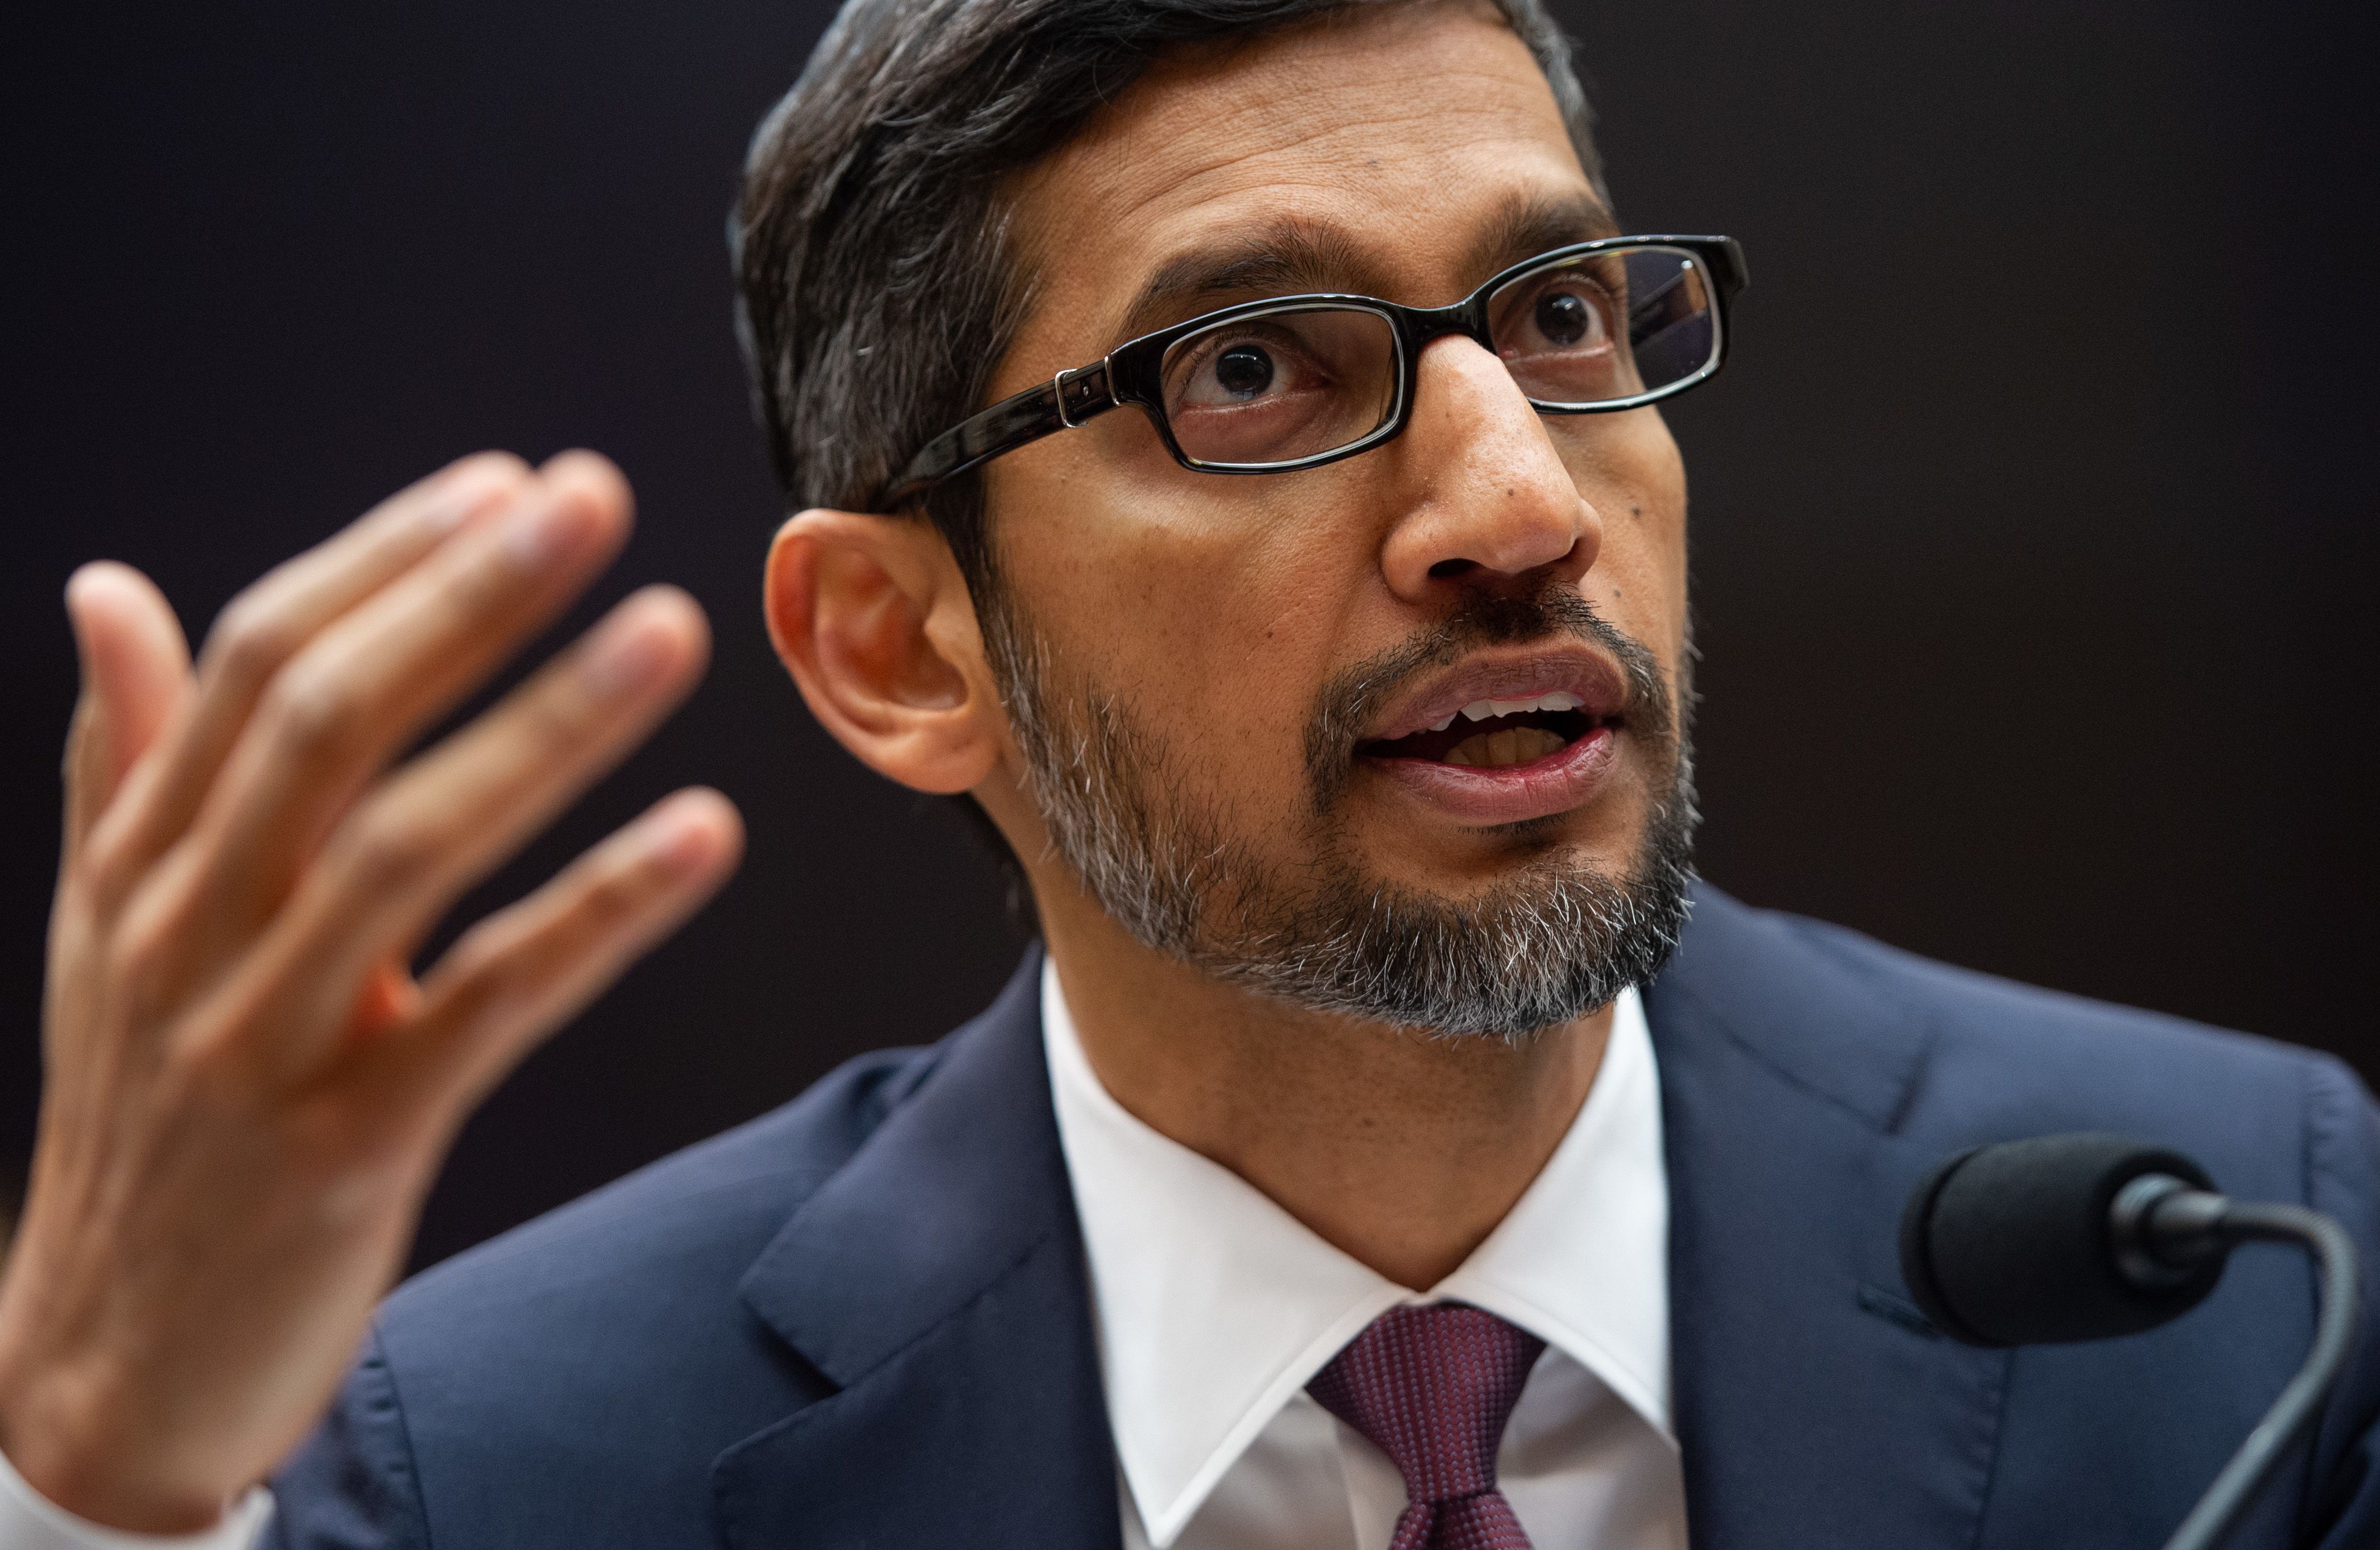 Google CEO says 'privacy cannot be a luxury good'